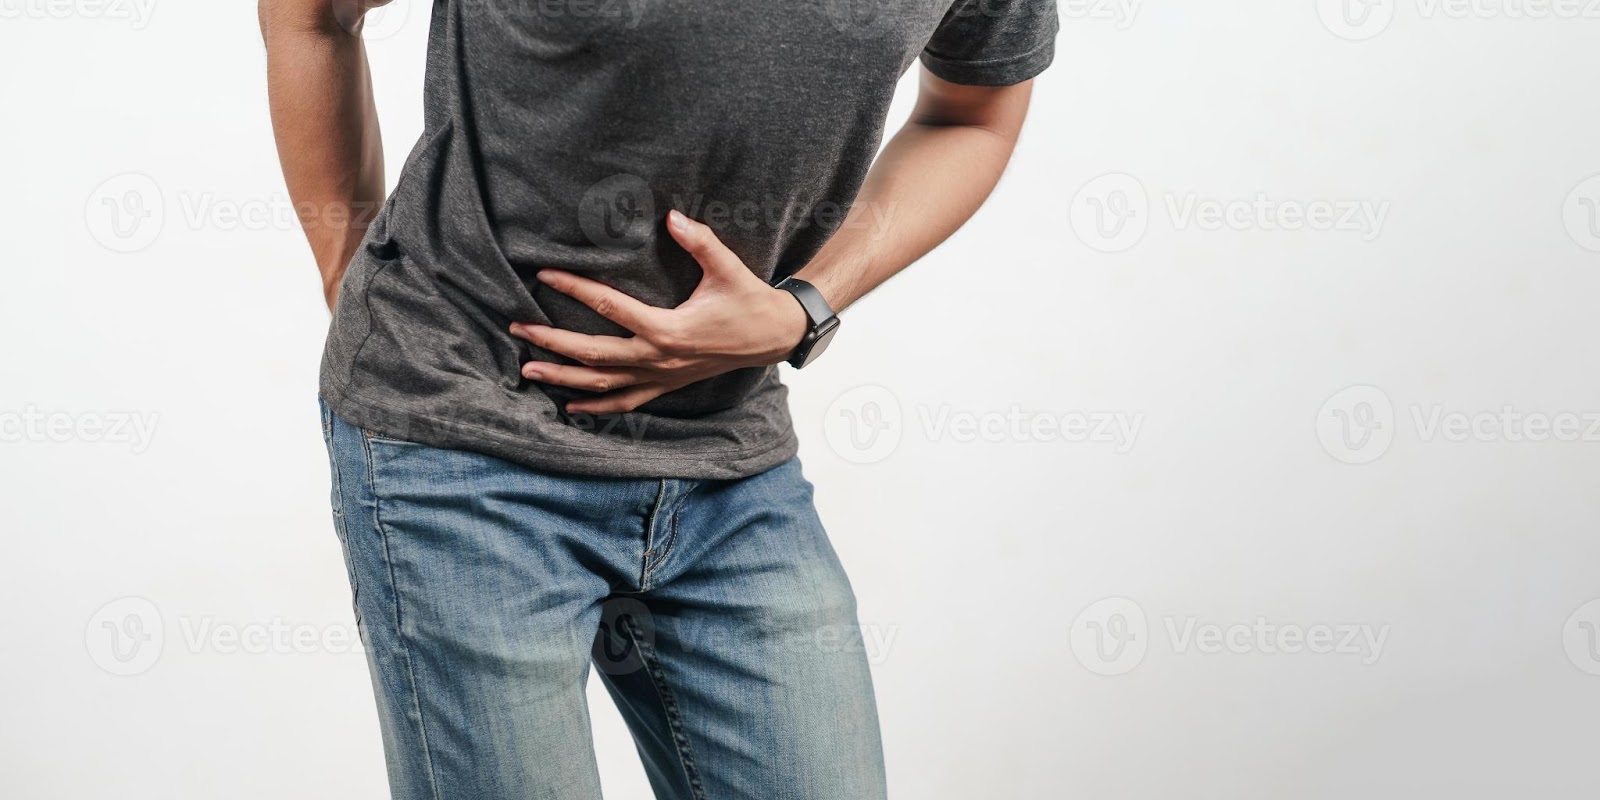 A man holding his stomach due to stomach ache